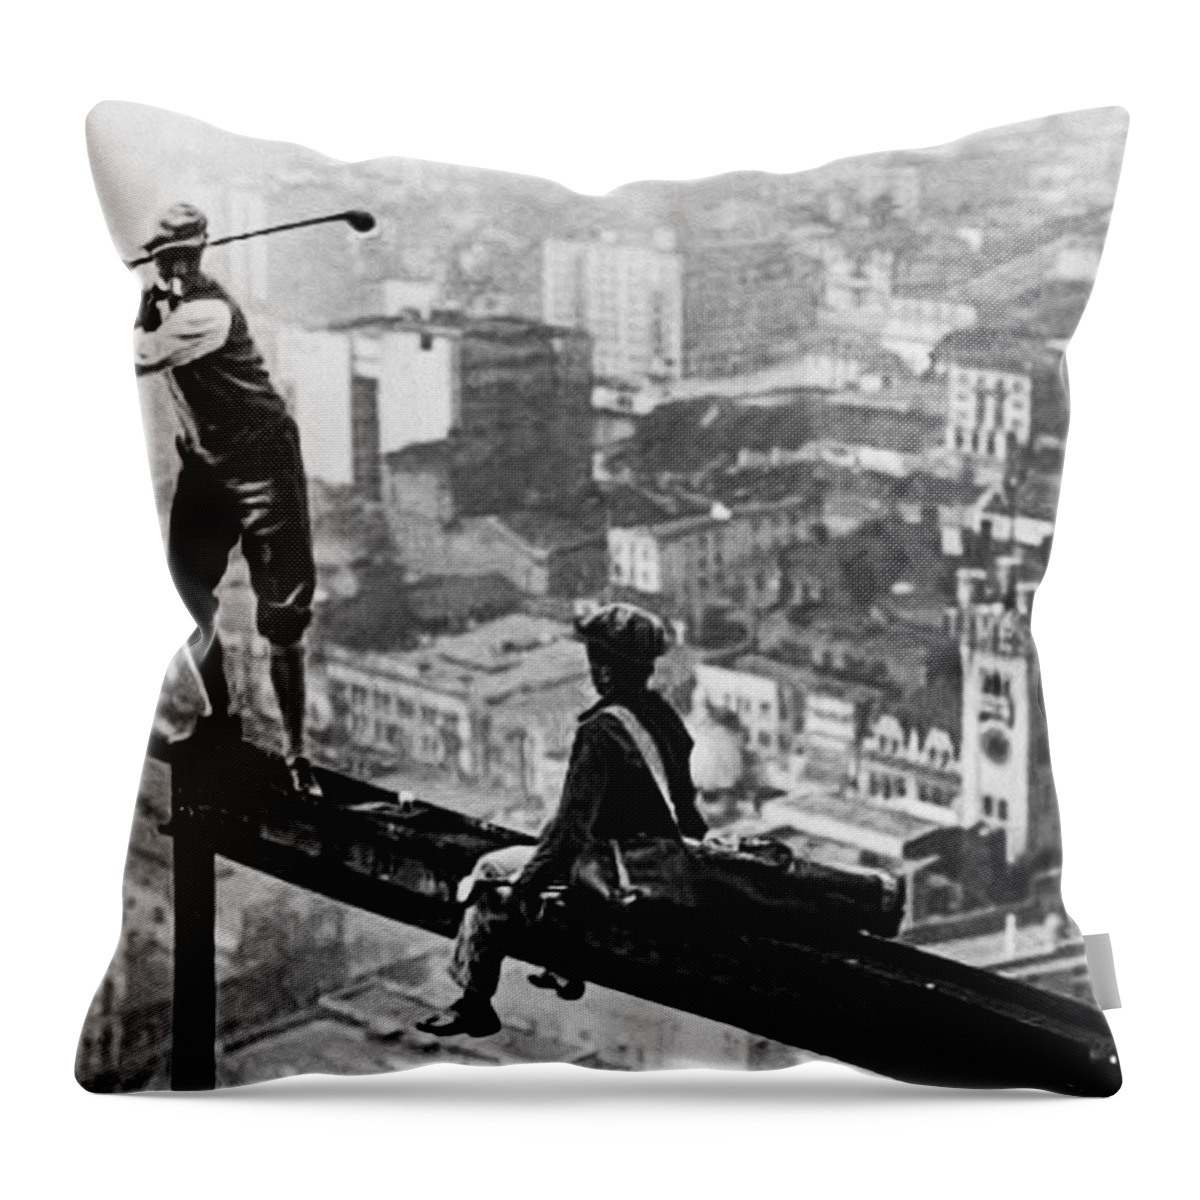 Tee Throw Pillow featuring the photograph Tee Time on a Skyscraper by Bill Cannon